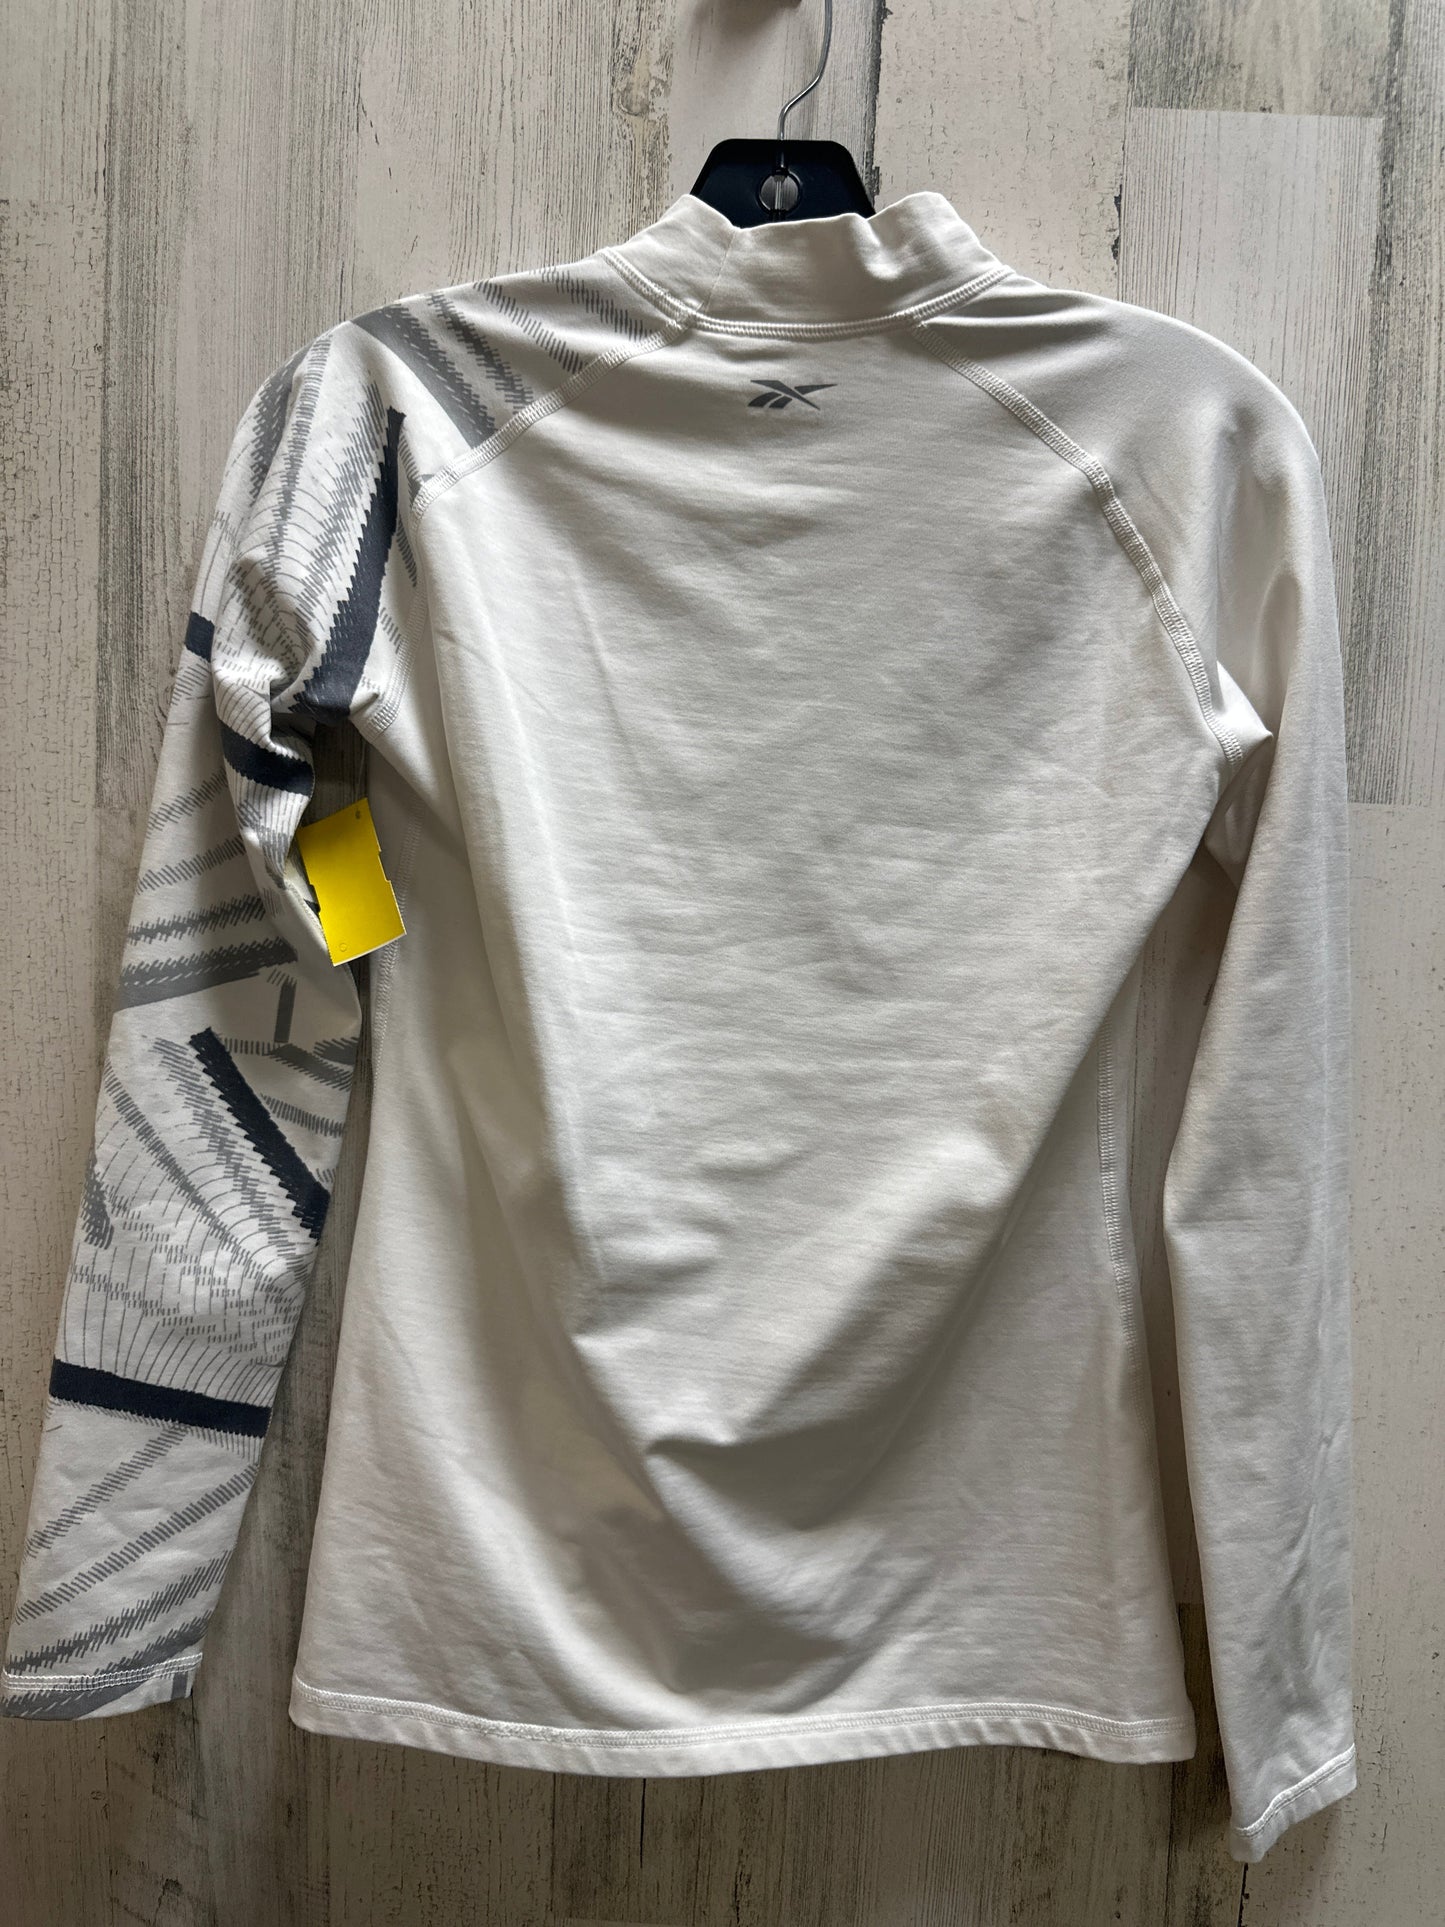 Athletic Top Long Sleeve Collar By Reebok  Size: S